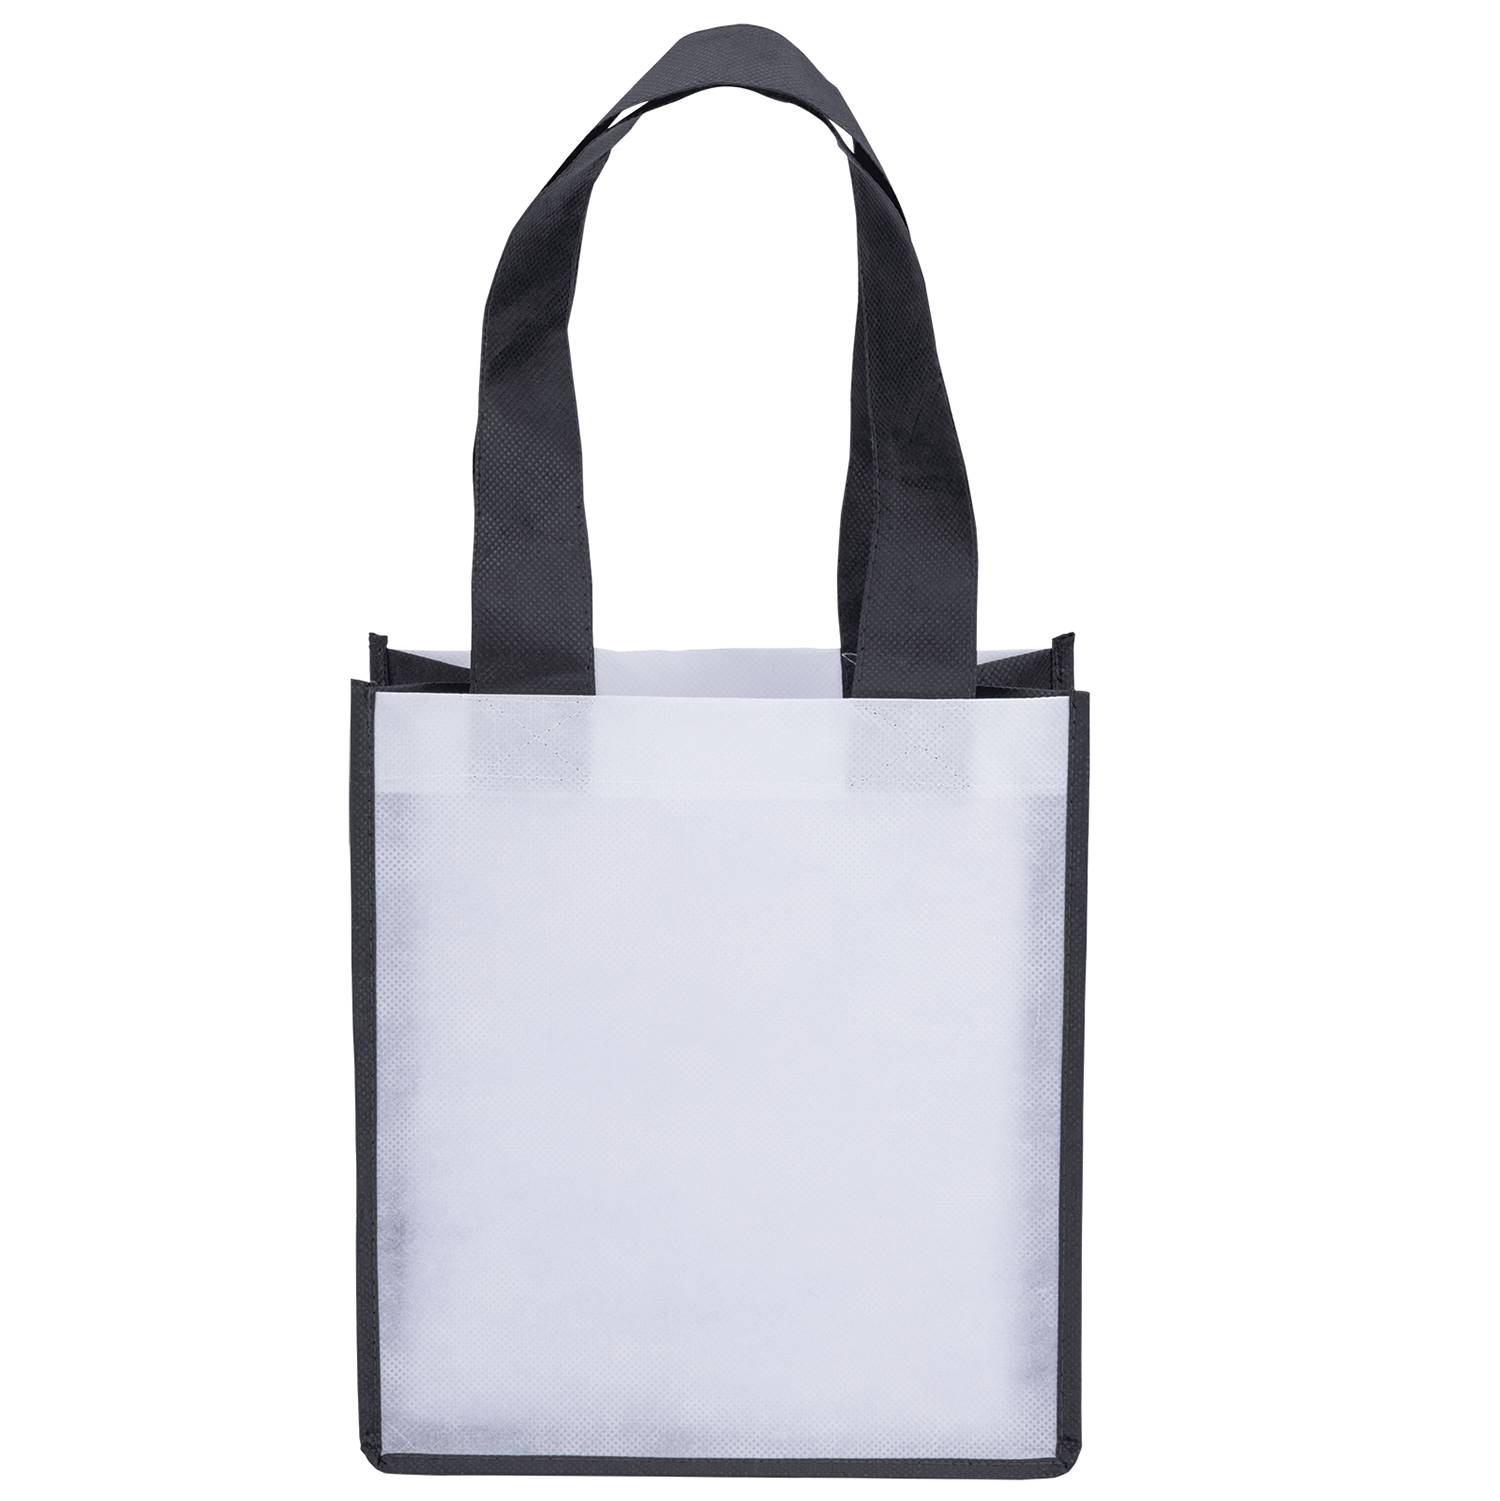 Bag Makers CVDE910 - Custom Printed Promotional Non-Woven Grocery Tote Bag